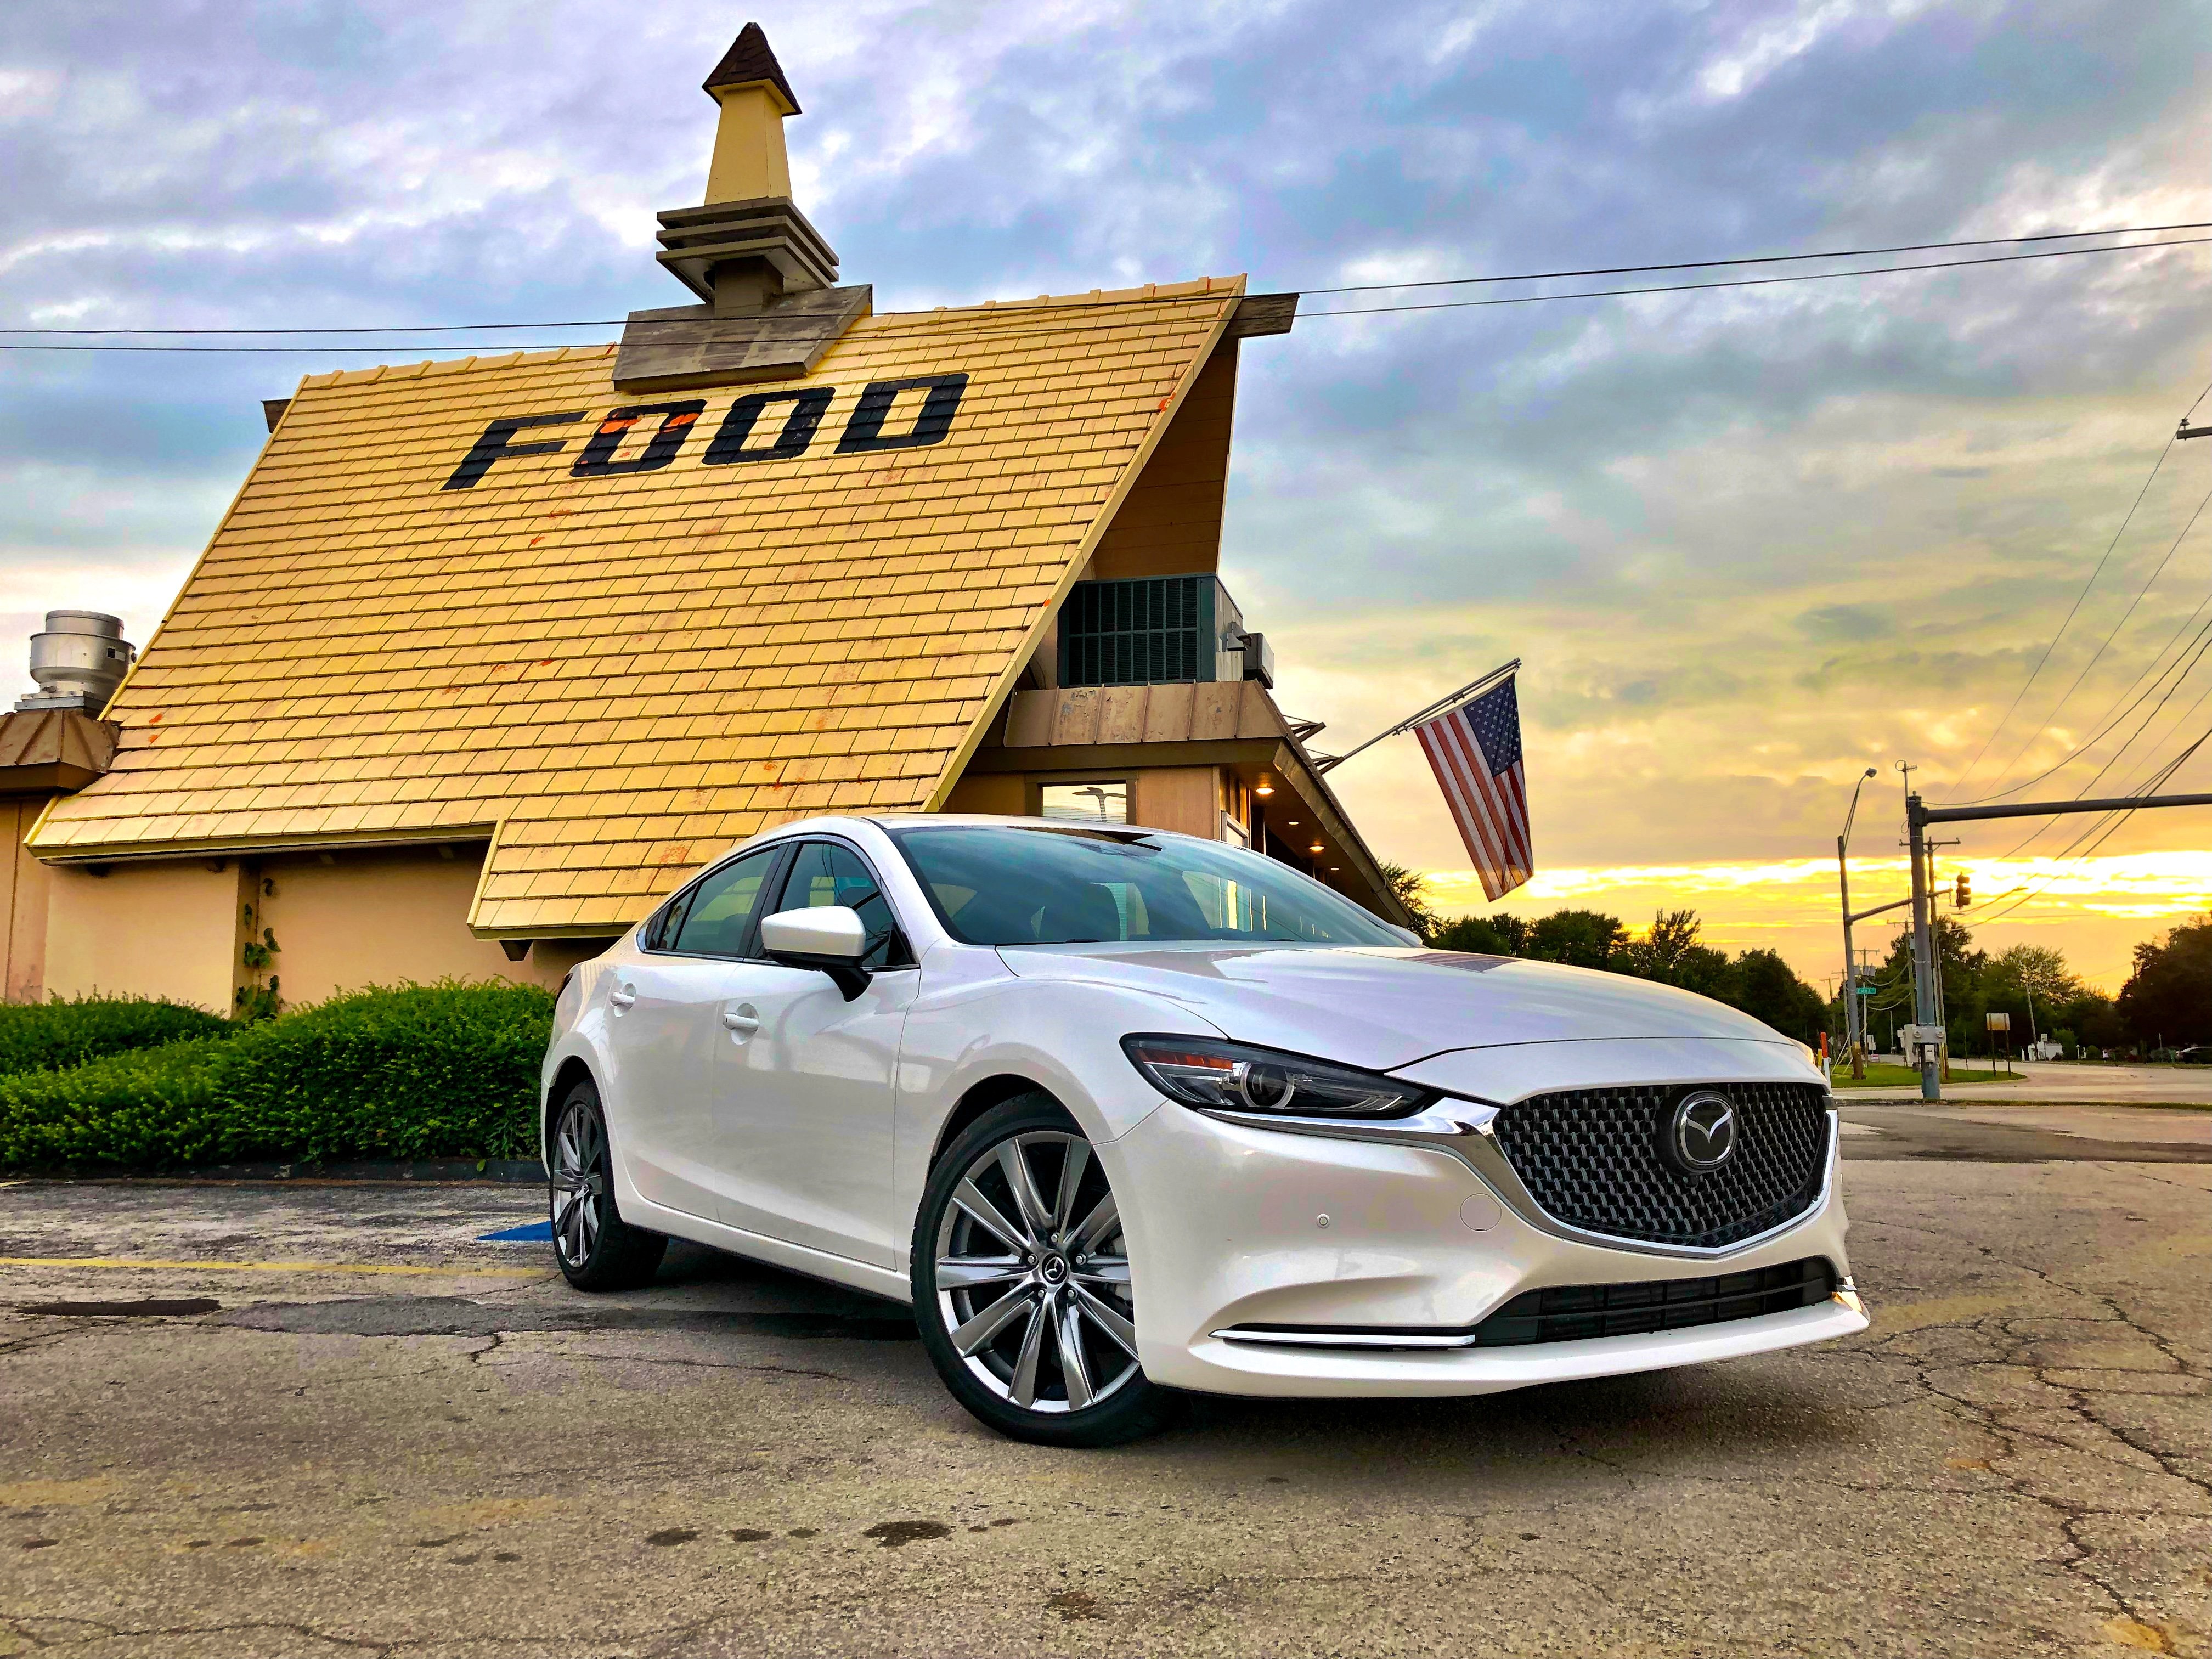 The 2018 Mazda 6 is an excellent sporty mid-size sedan.